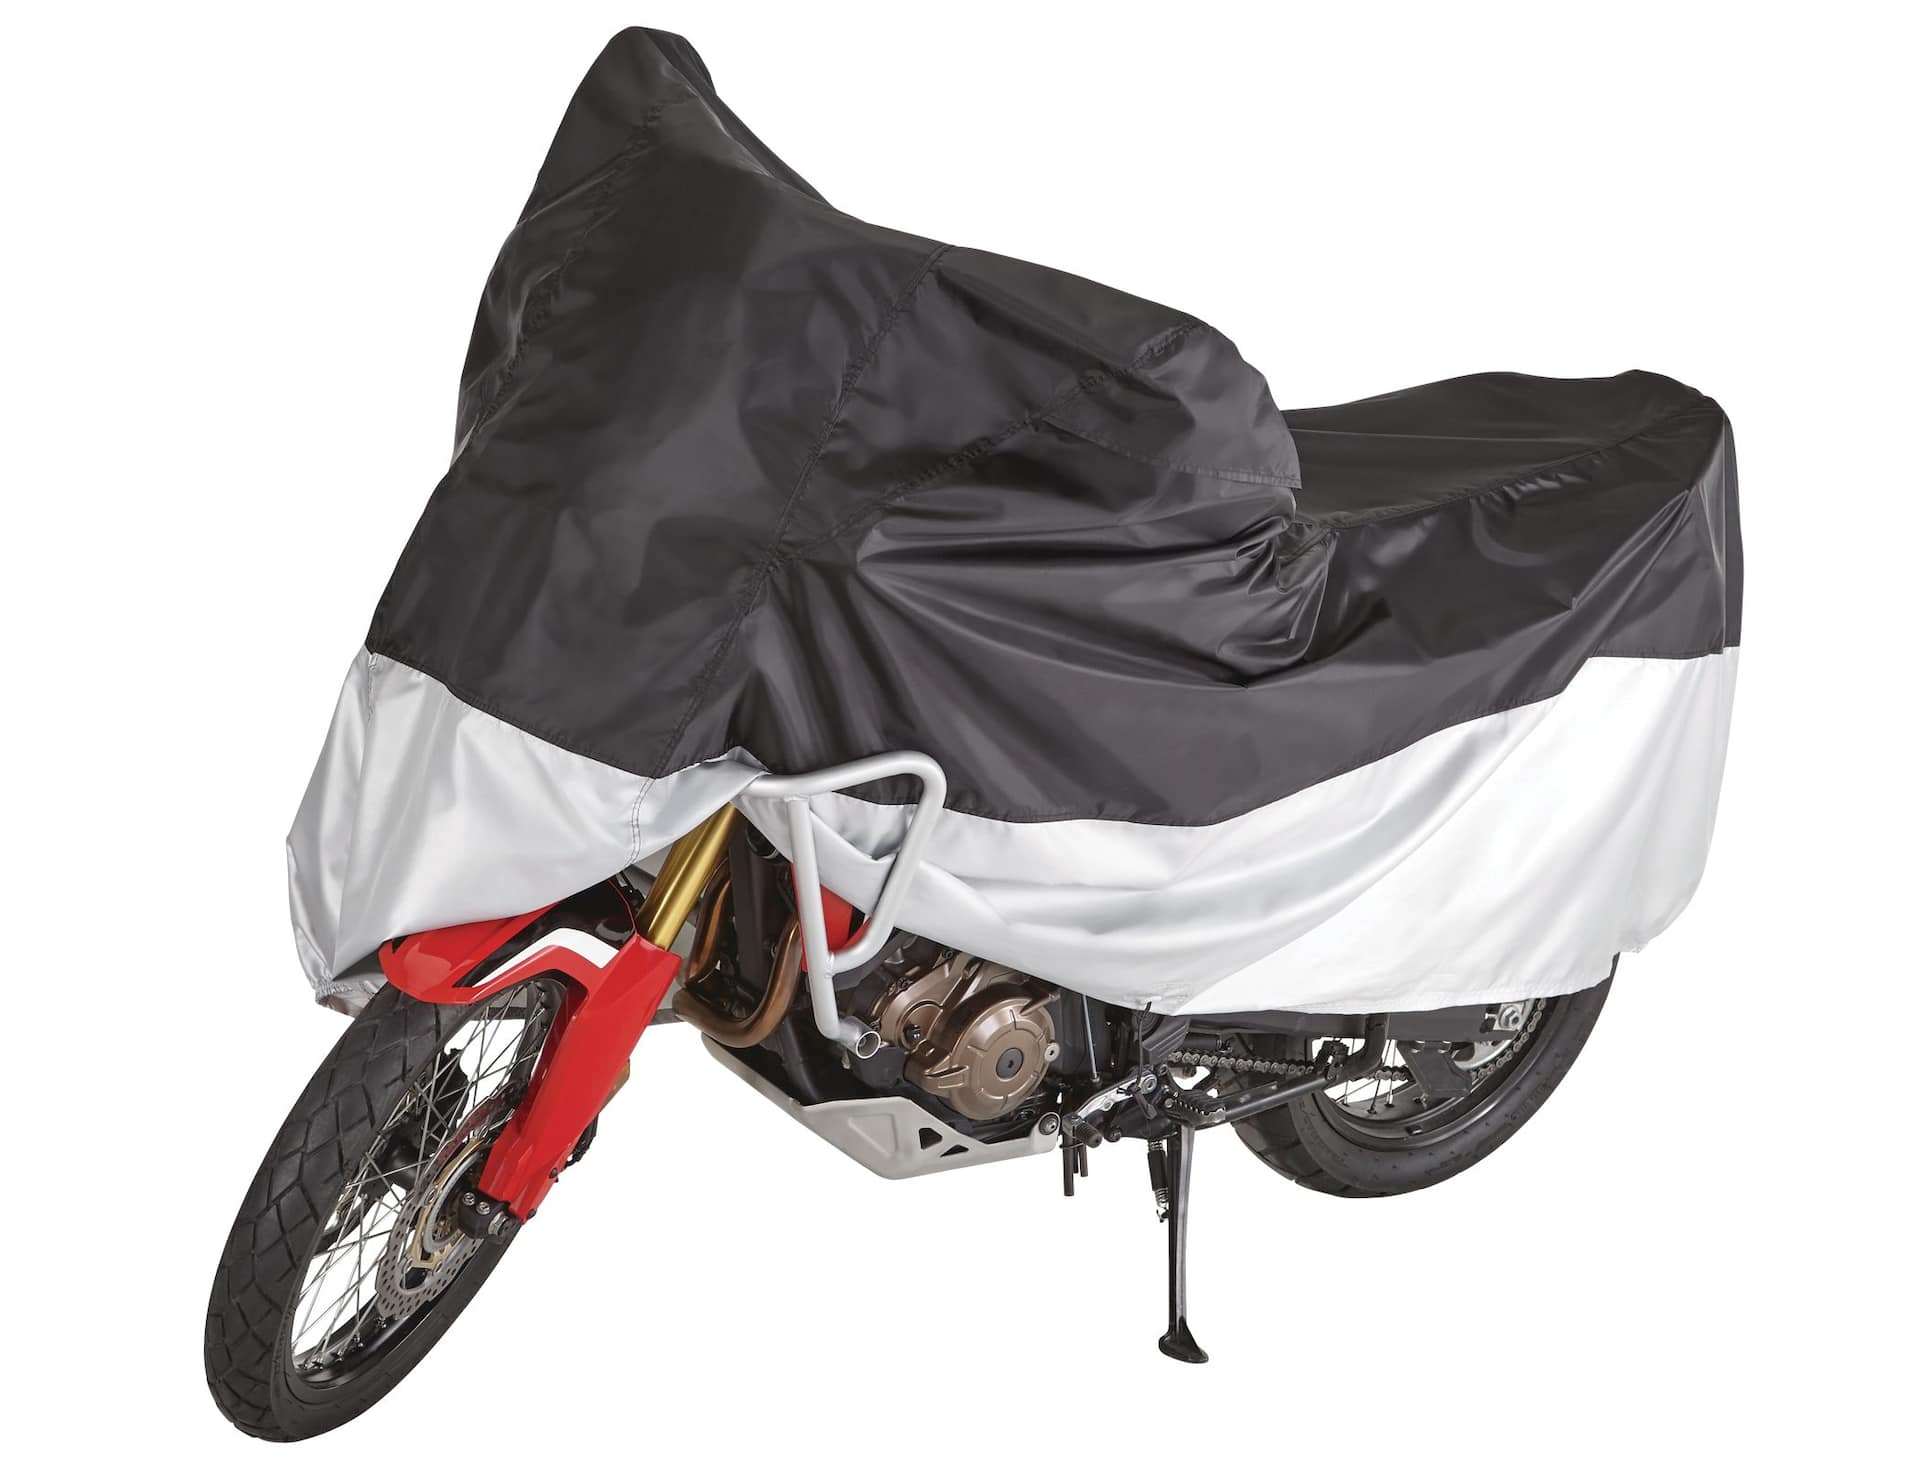 Tripel Fabric Motorcycle Cover for Water & UV Resistance, X-Large